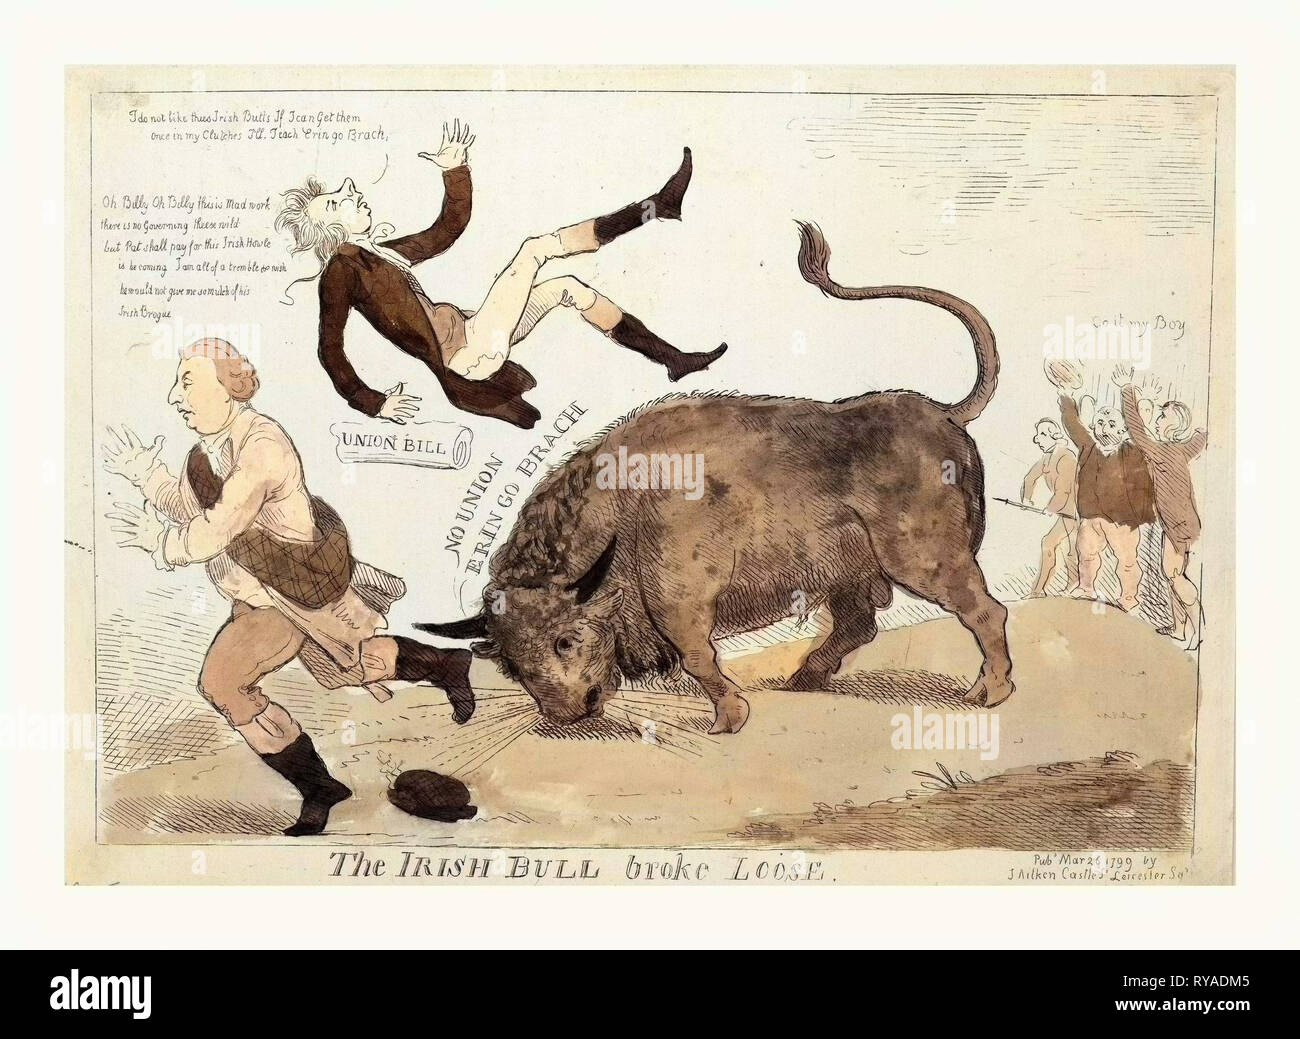 The Irish Bull Broke Loose, Cruikshank, Isaac, 1756?-1811?, Engraving 1799,  the Irish Bull Tossing William Pitt Into the Air and About to Do the Same to Lord Dundas Who Runs to the Left, on the Far Right, Those Opposed to Pitt's Union Bill Cheer on the Bull, Go It My Boy Stock Photo